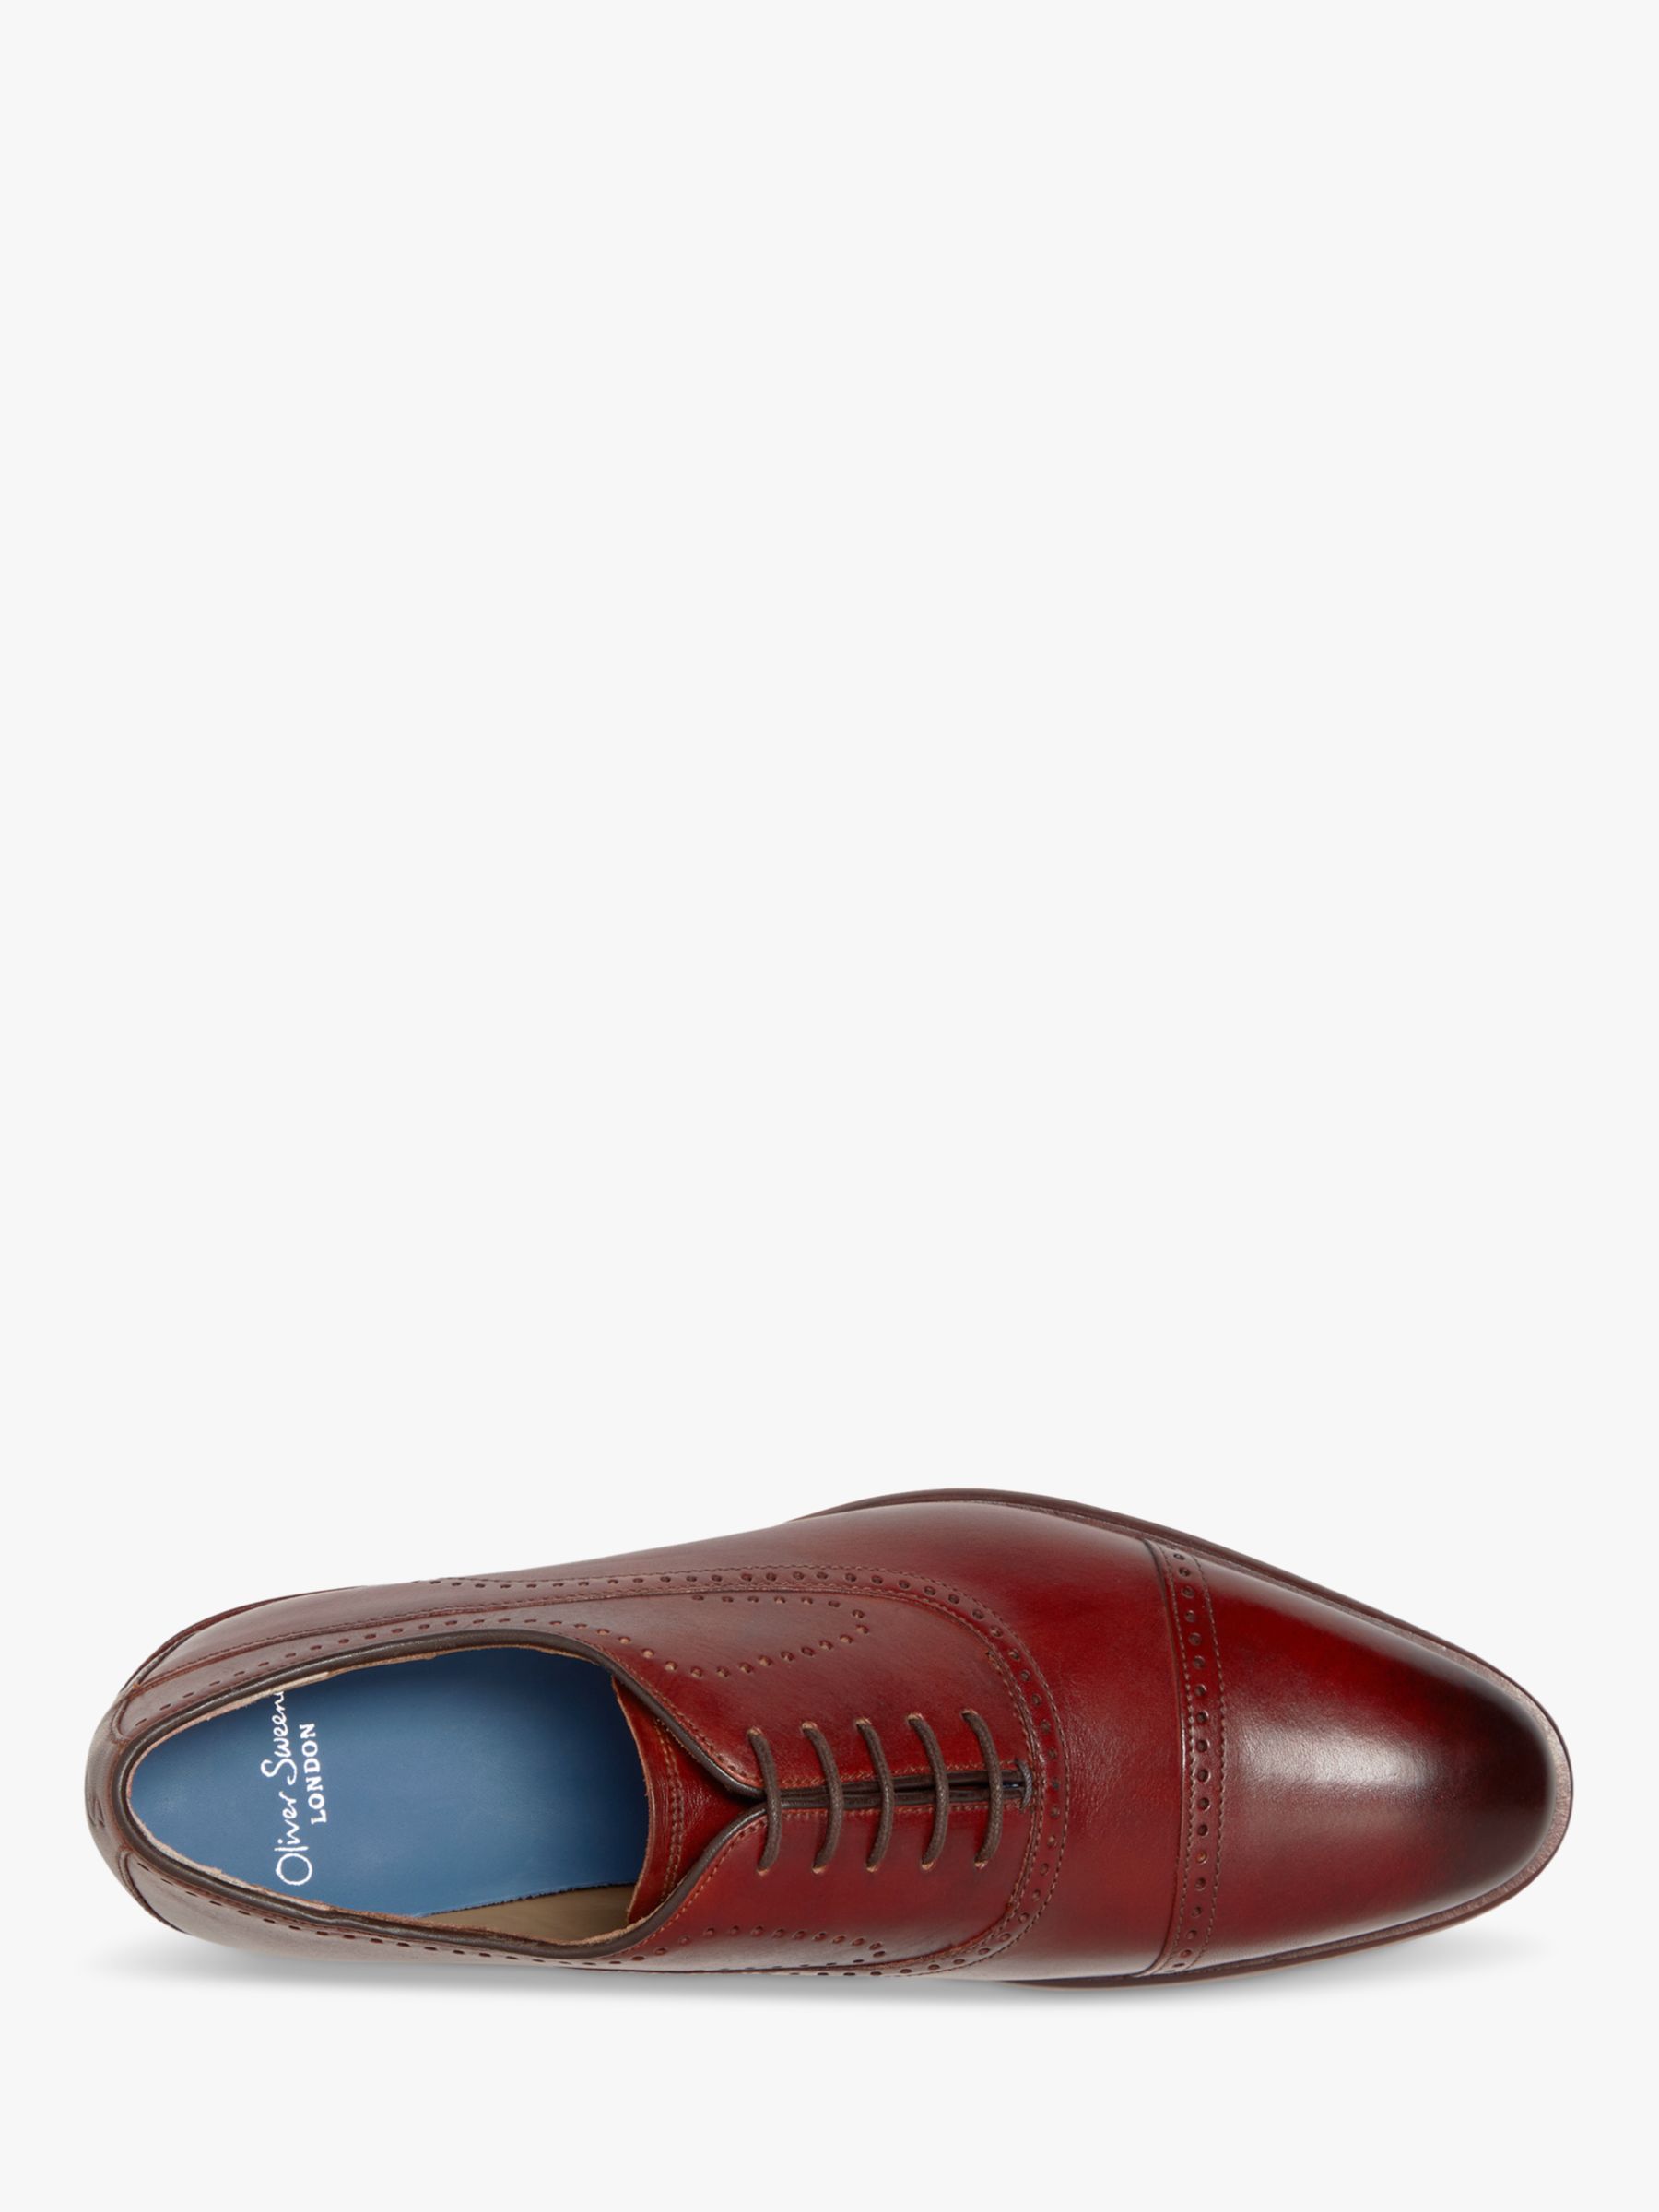 Oliver Sweeney Mallory Oxford Shoes, Tan at John Lewis & Partners